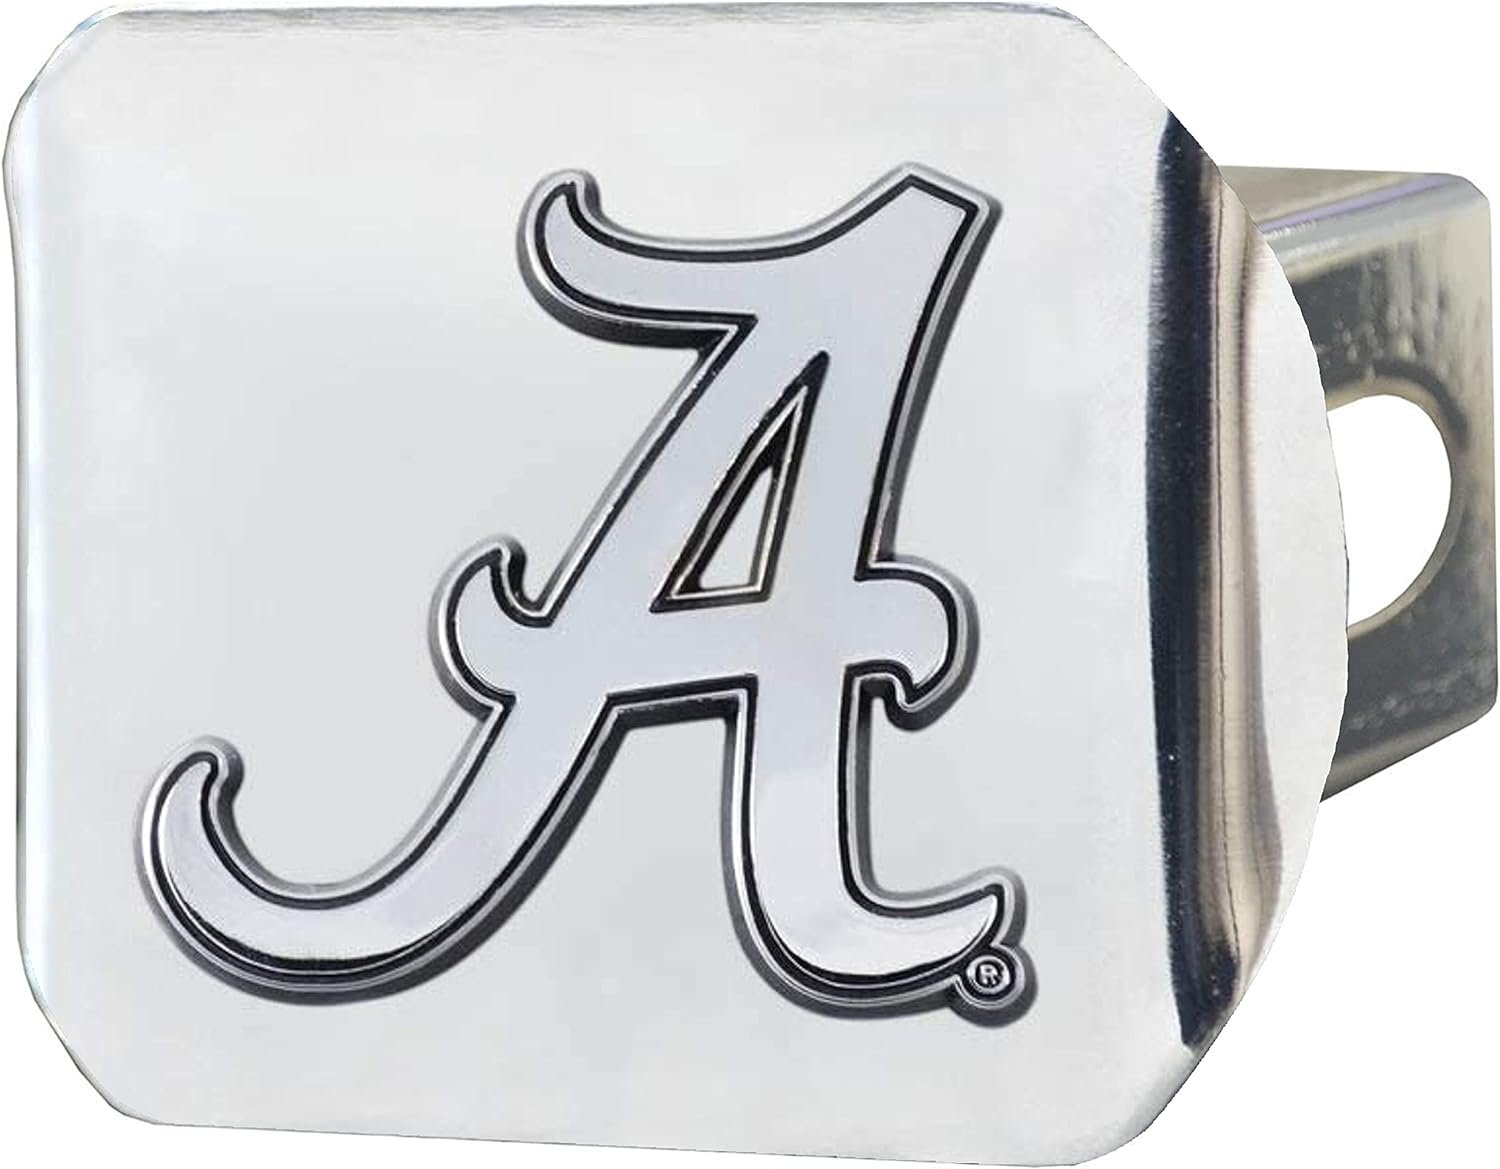 University of Alabama Crimson Tide Hitch Cover Solid Metal with Raised Chrome Metal Emblem 2" Square Type III